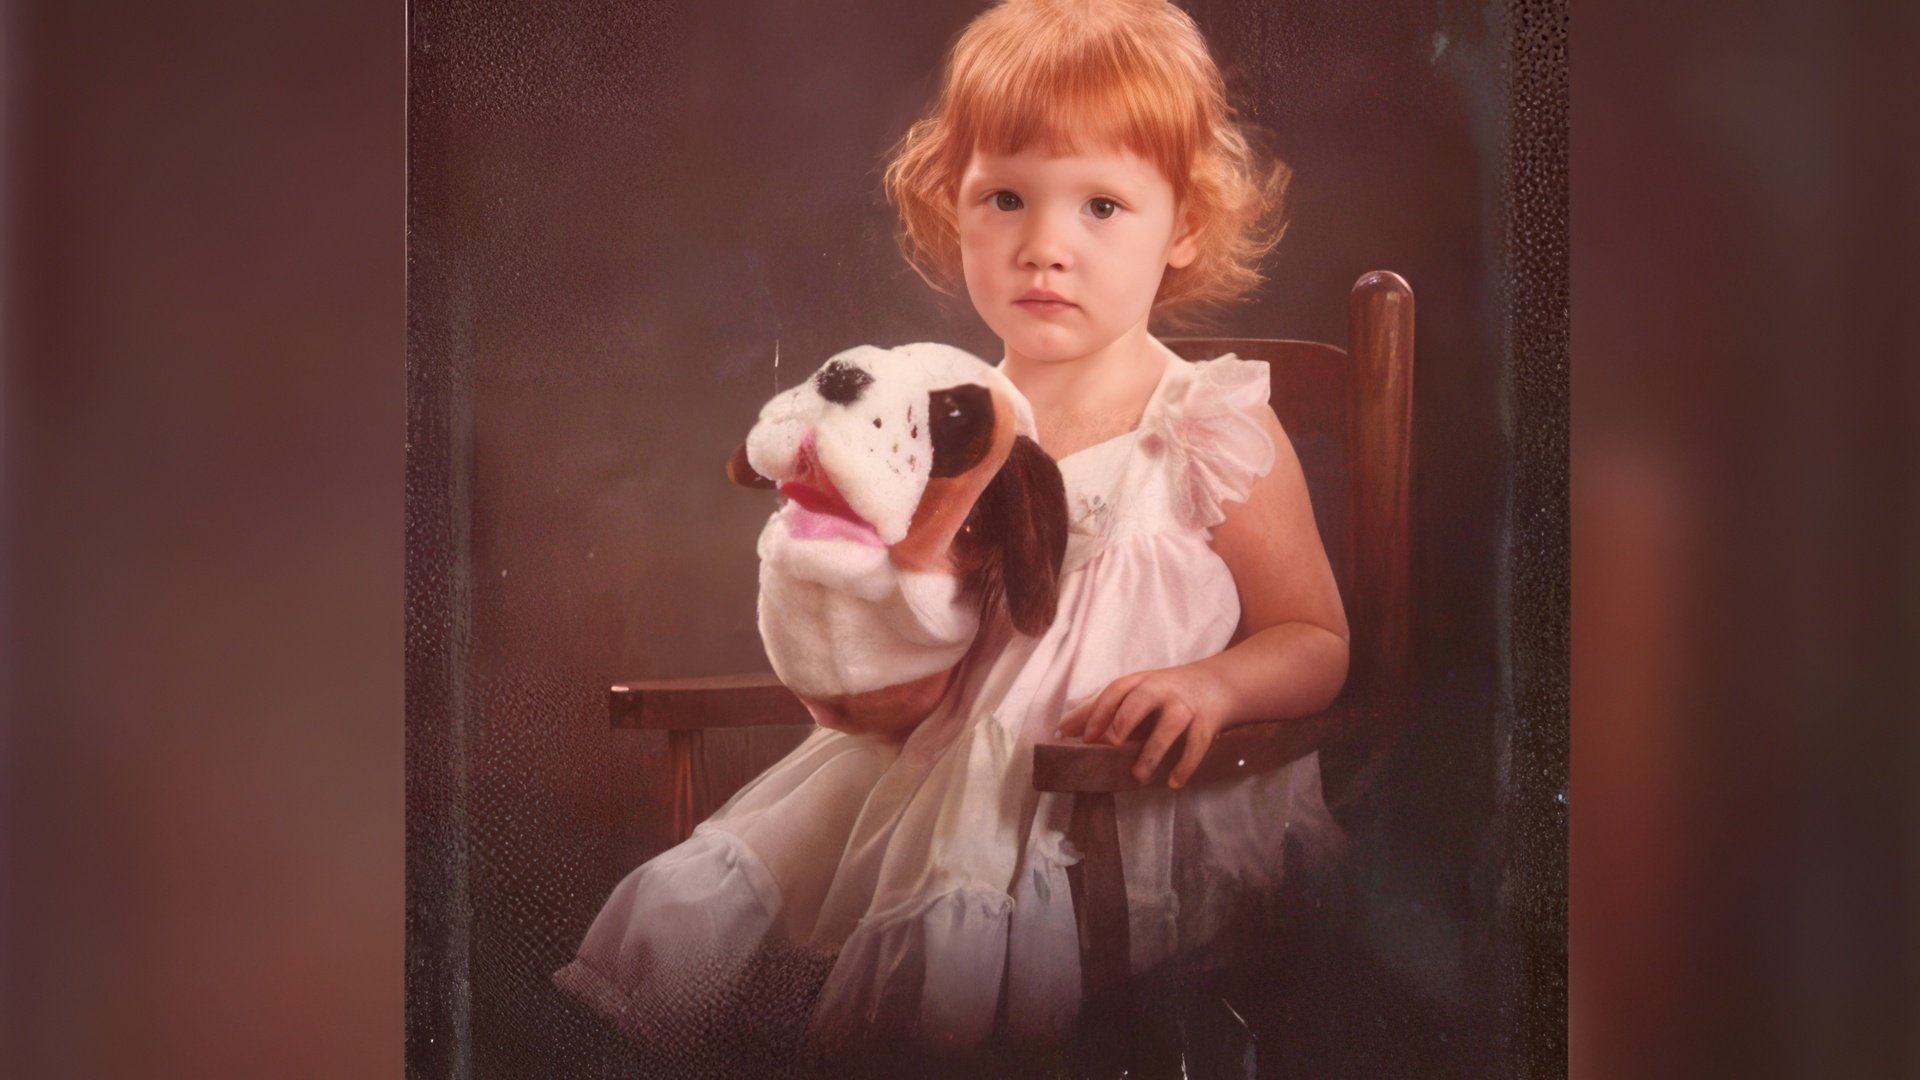 Jessica Chastain as a child